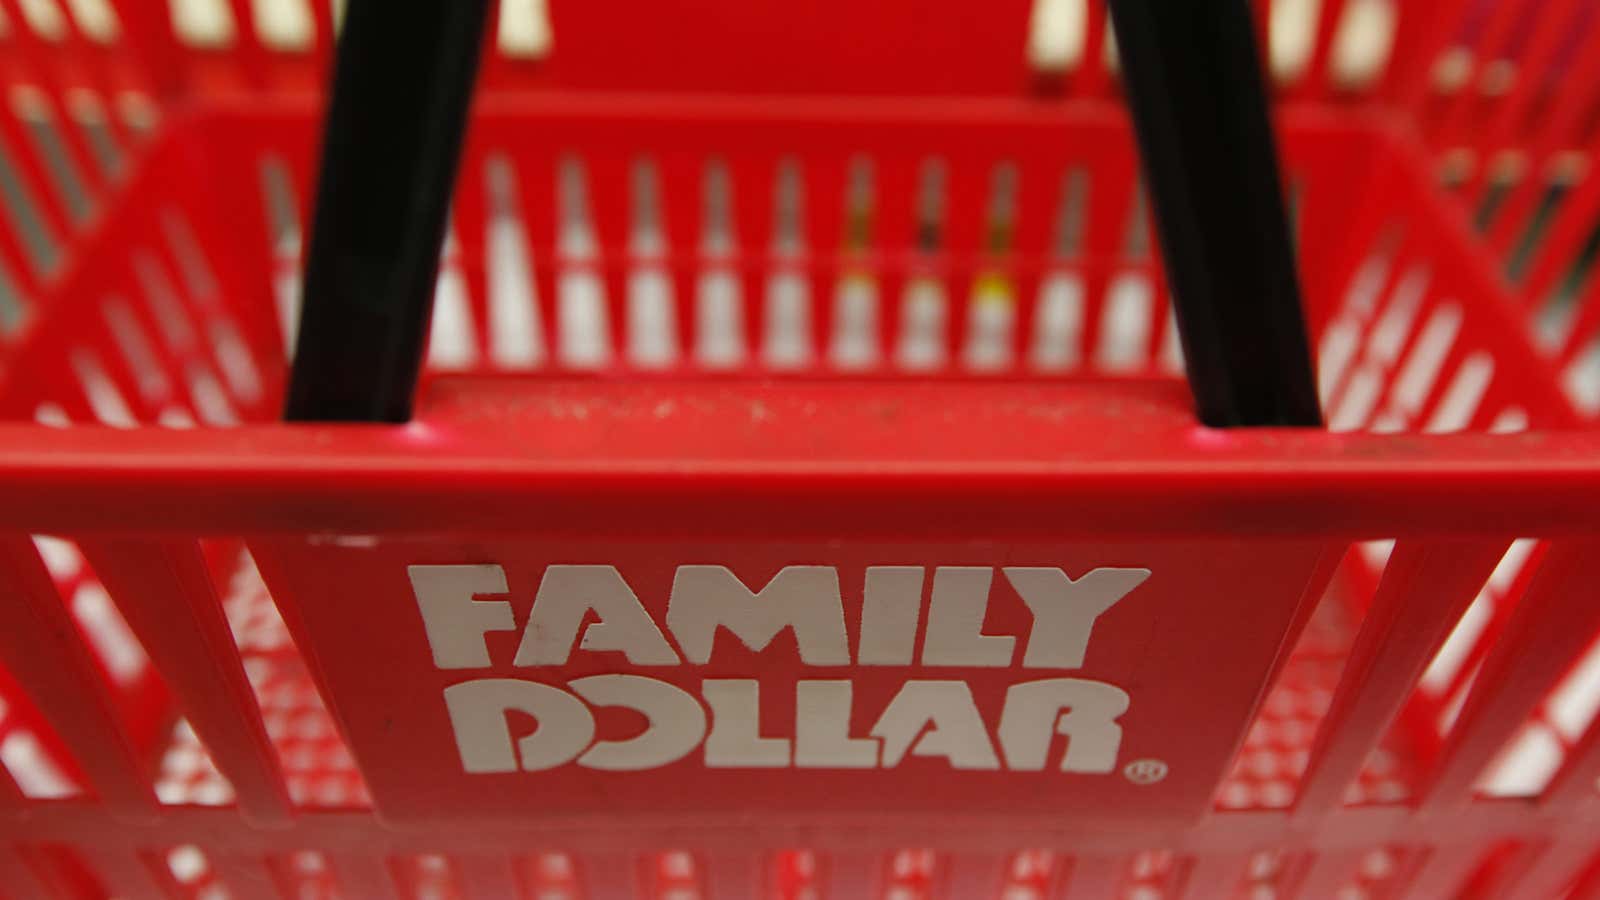 Like its customers, Family Dollar has been going through a rough patch.